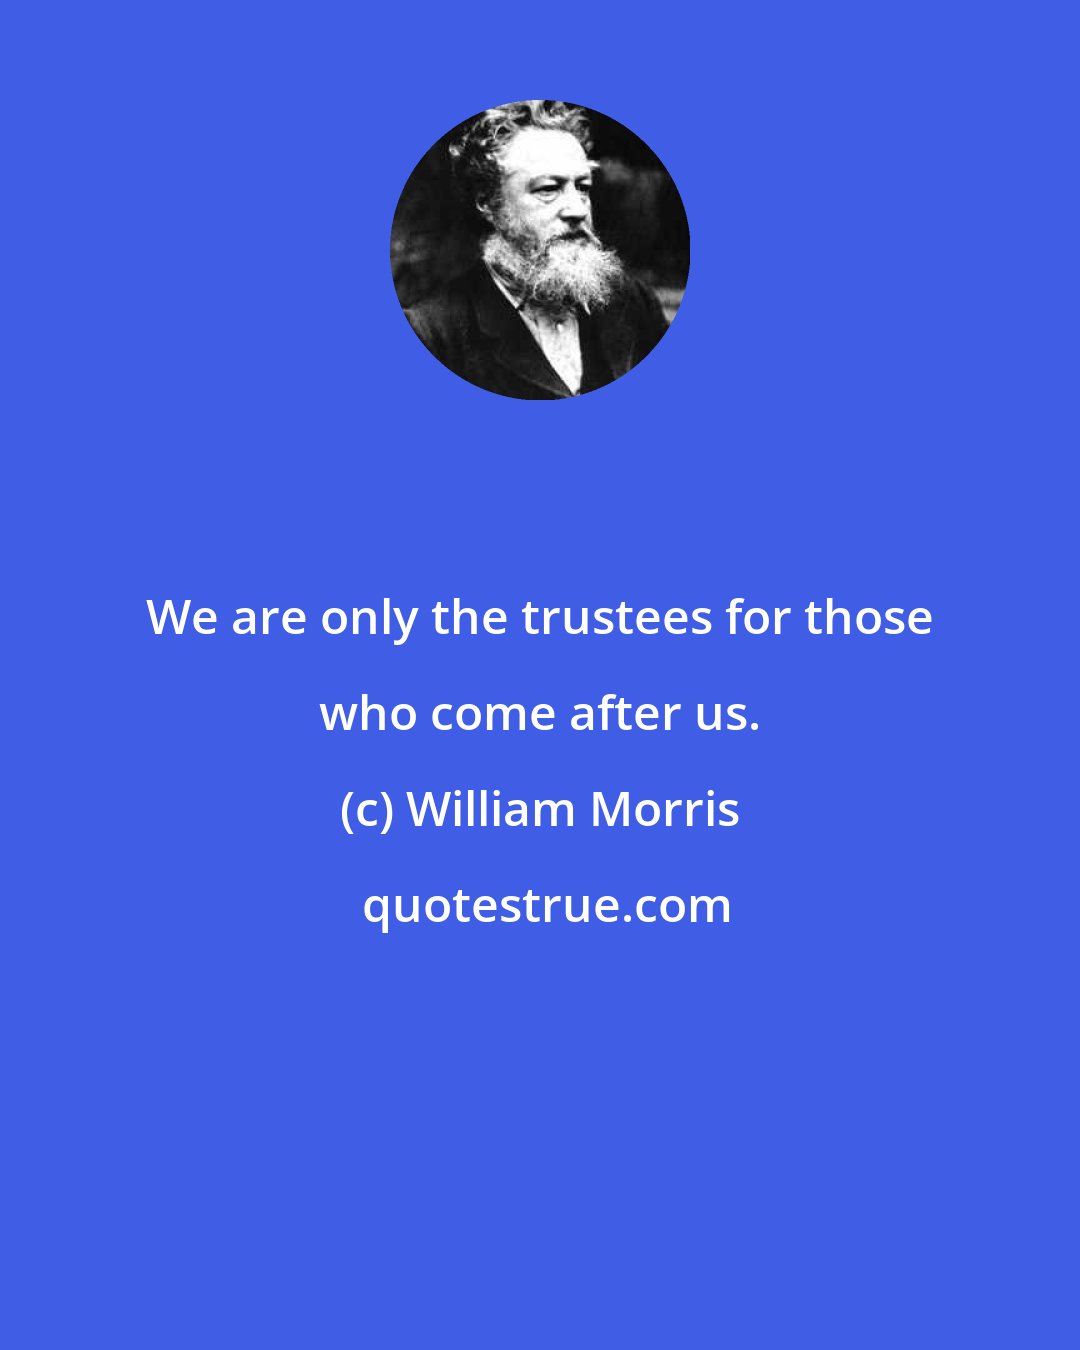 William Morris: We are only the trustees for those who come after us.